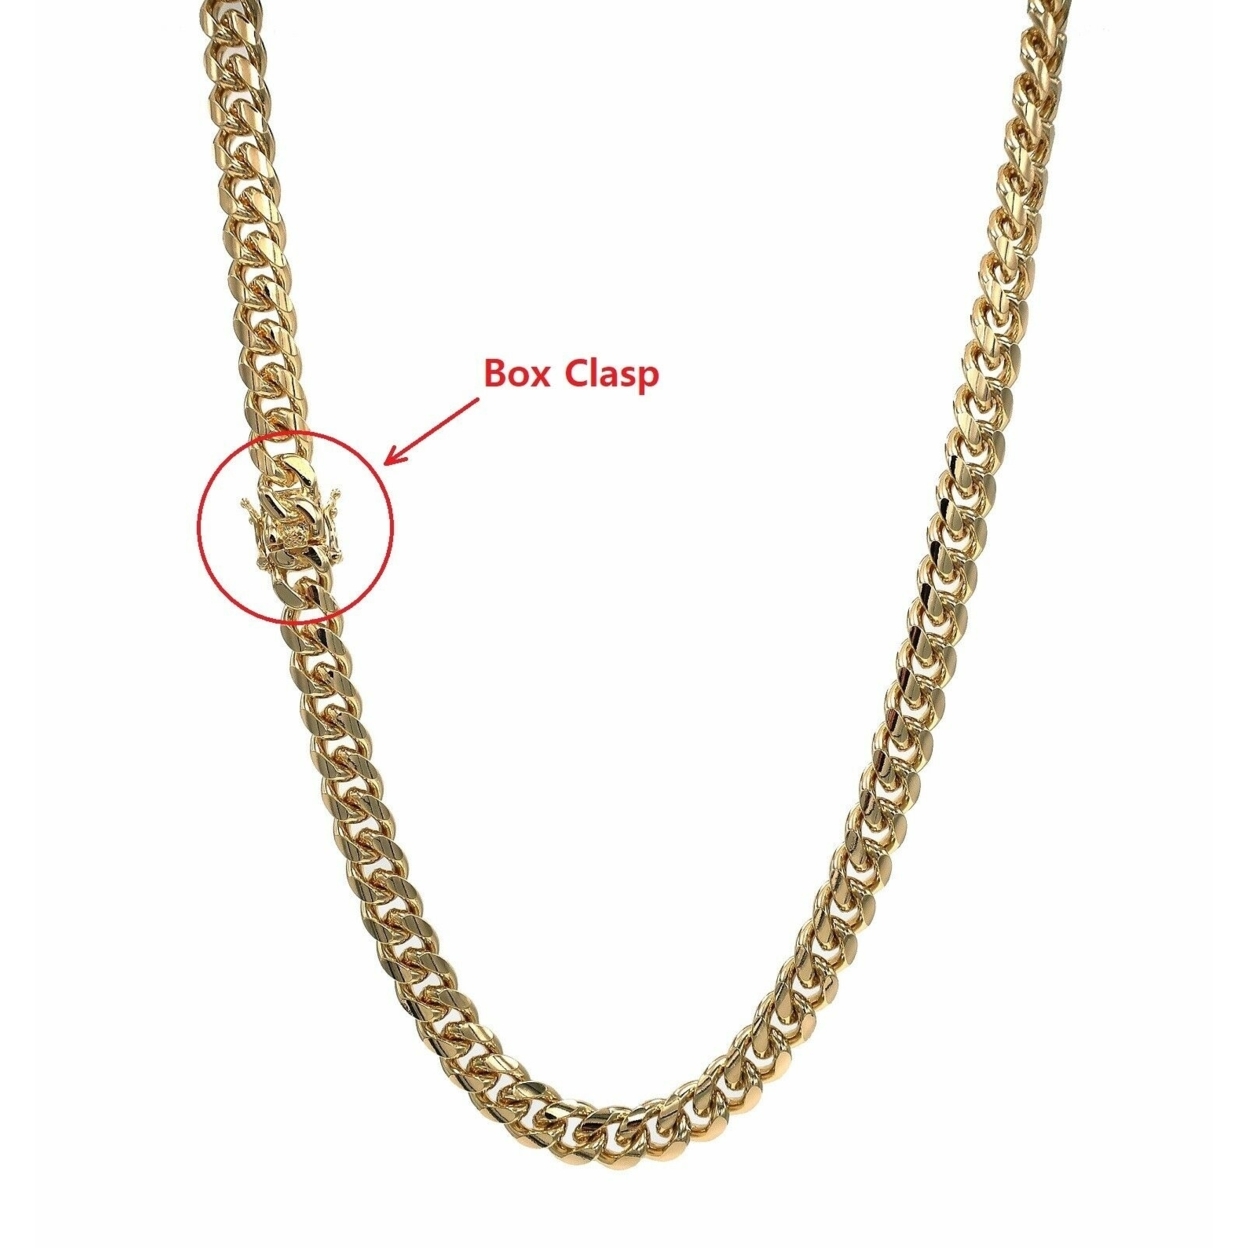 10mm 24 MIAMI CUBAN LINK CHAIN BOX CLASP LOCK NECKLACE 14K GOLD Filled High Polish Finsh